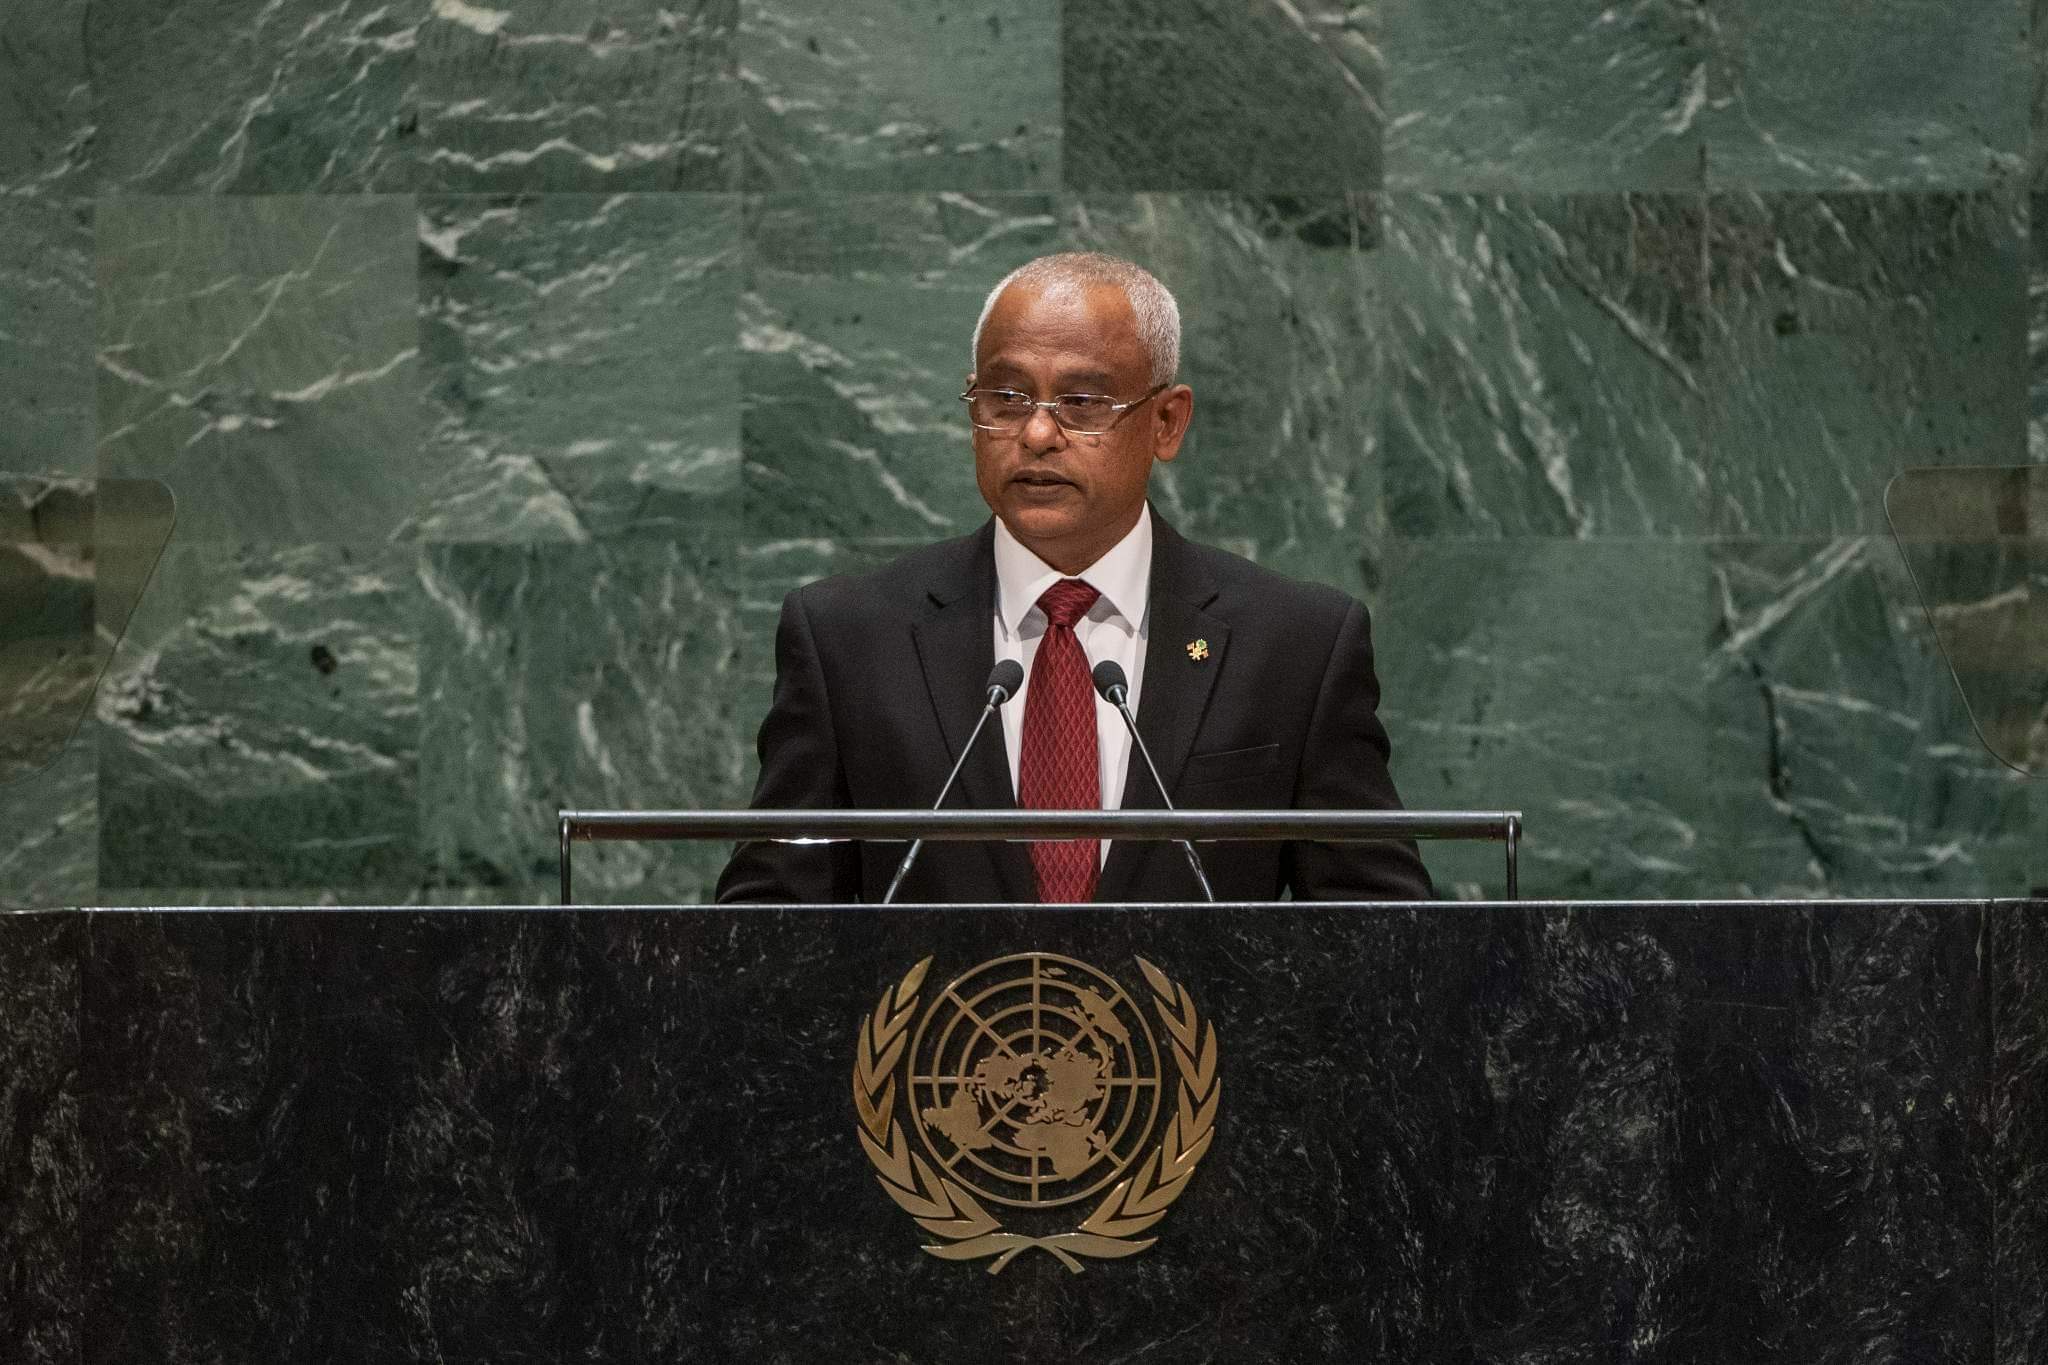 President Ibrahim Mohamed Solih speaking at the UN.